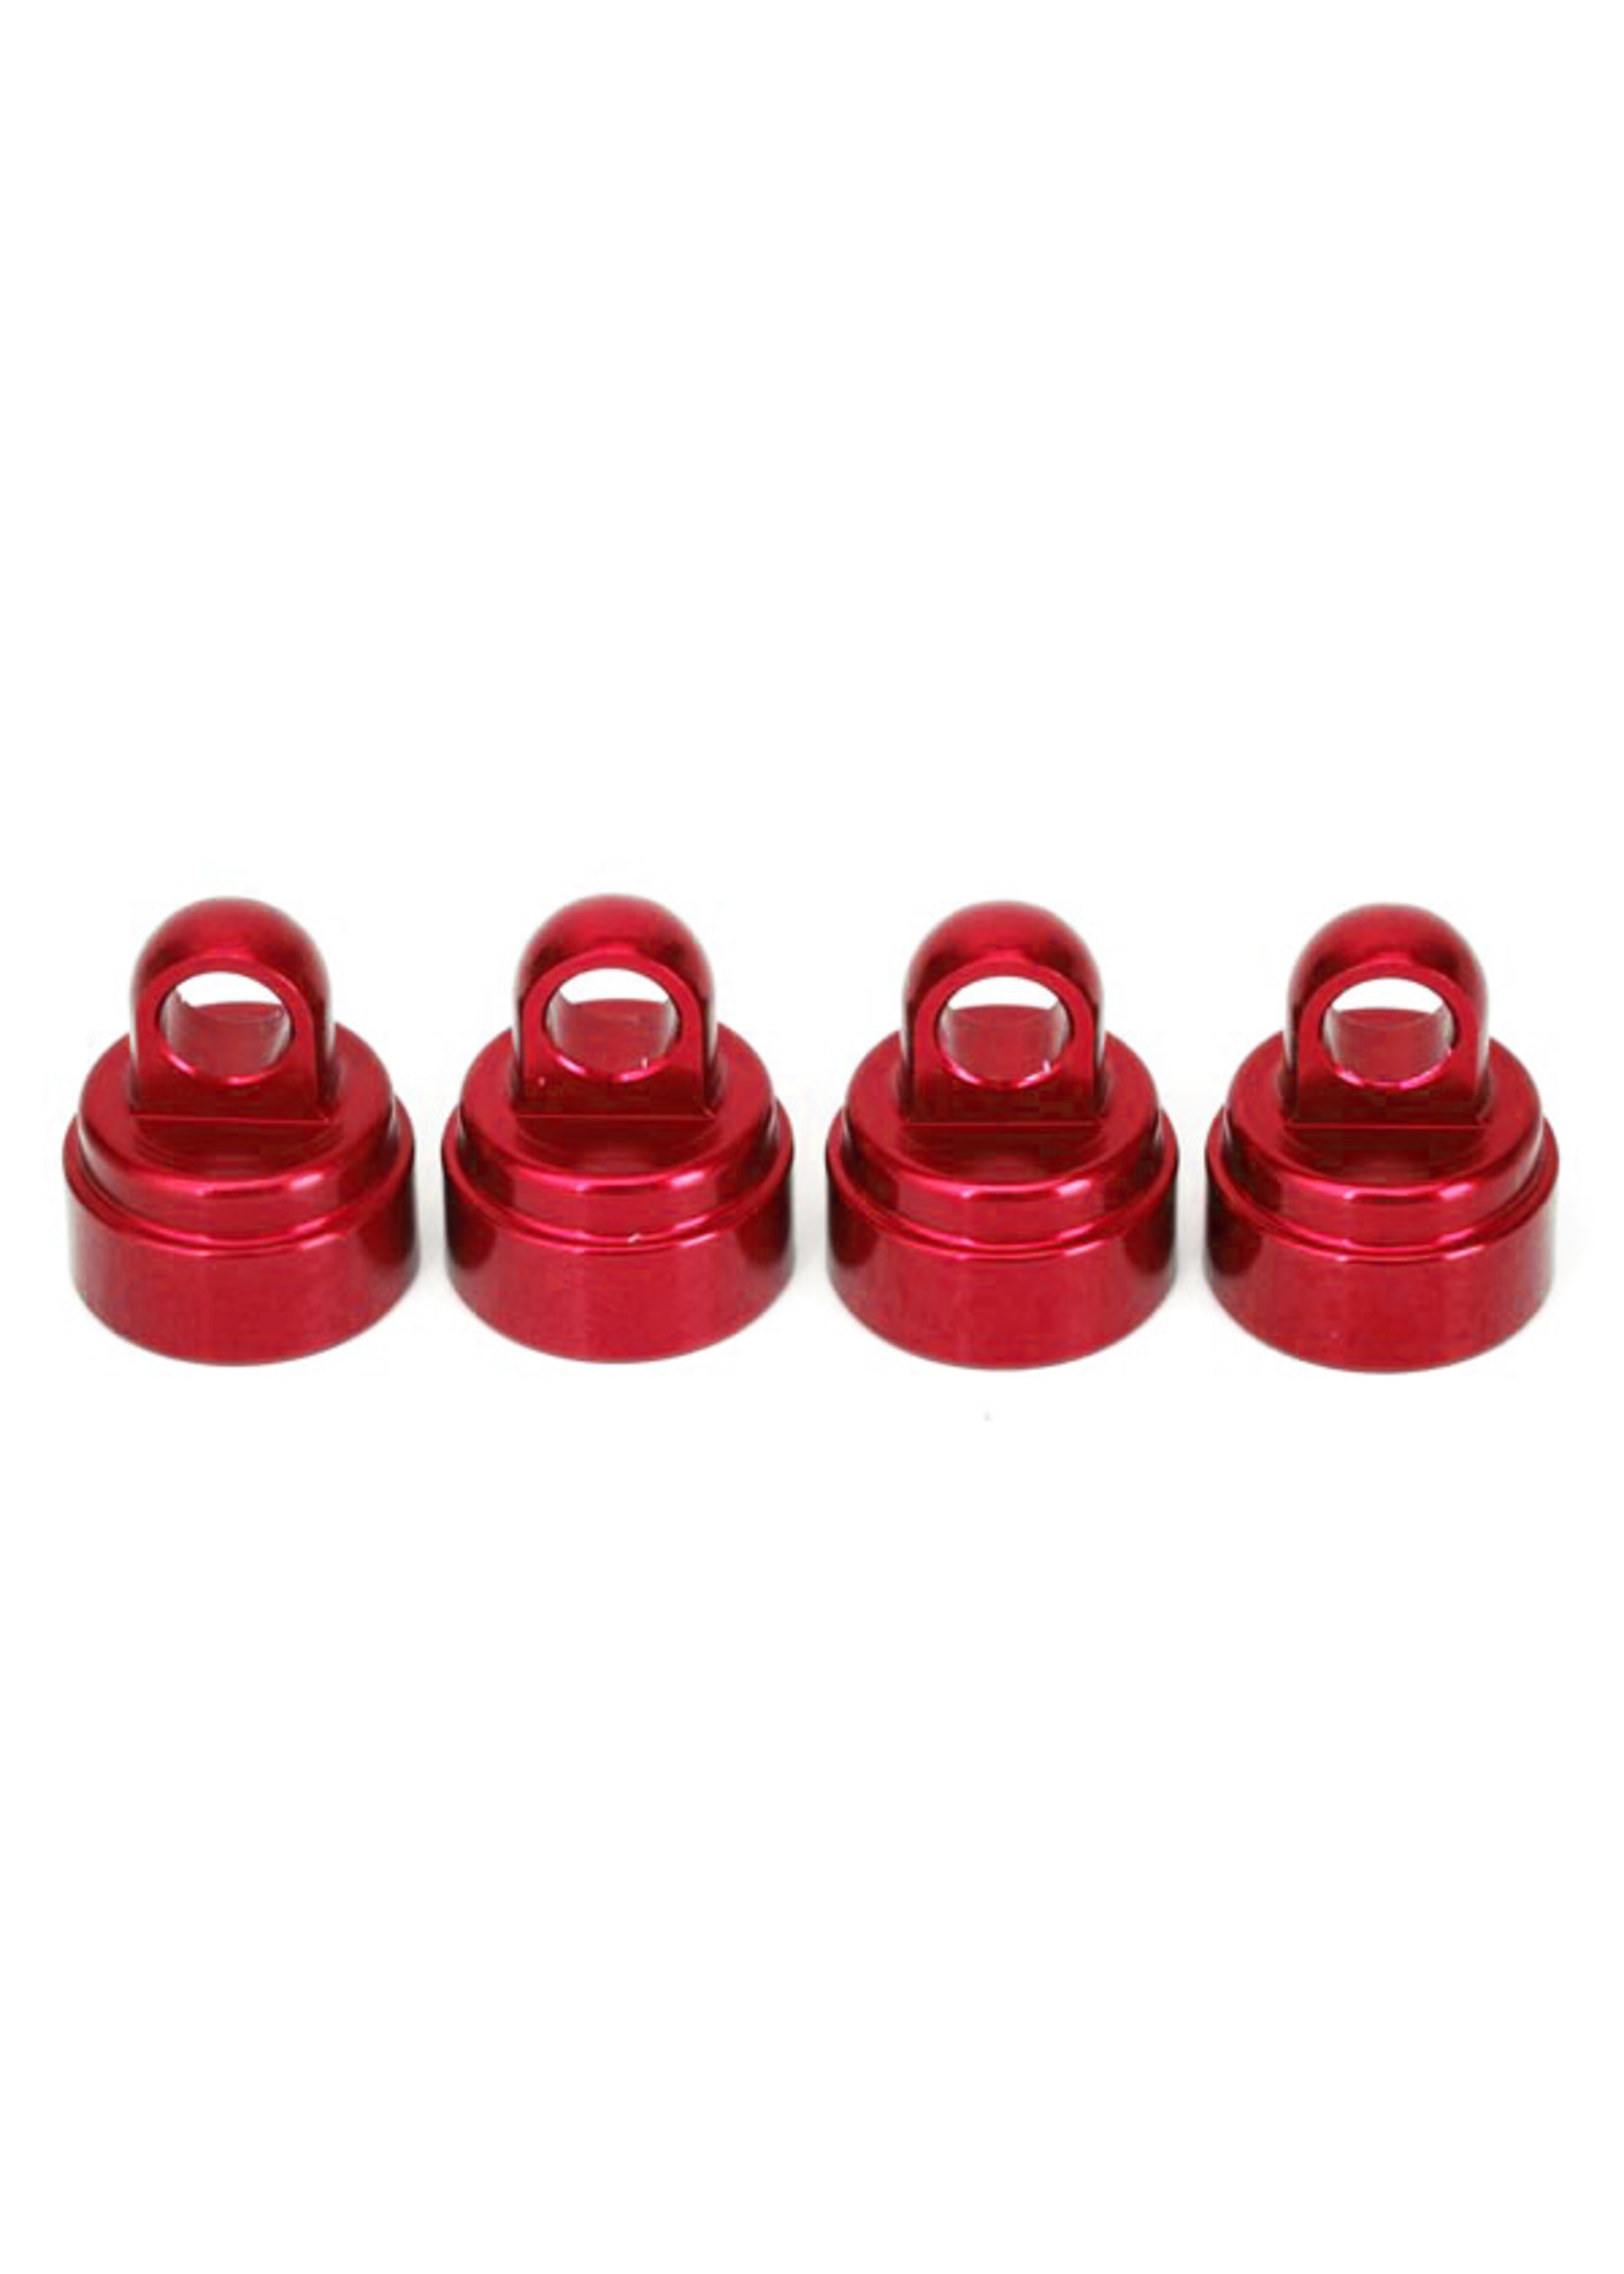 Traxxas 3767X - Shock Caps Aluminum - Red Anodized (4)